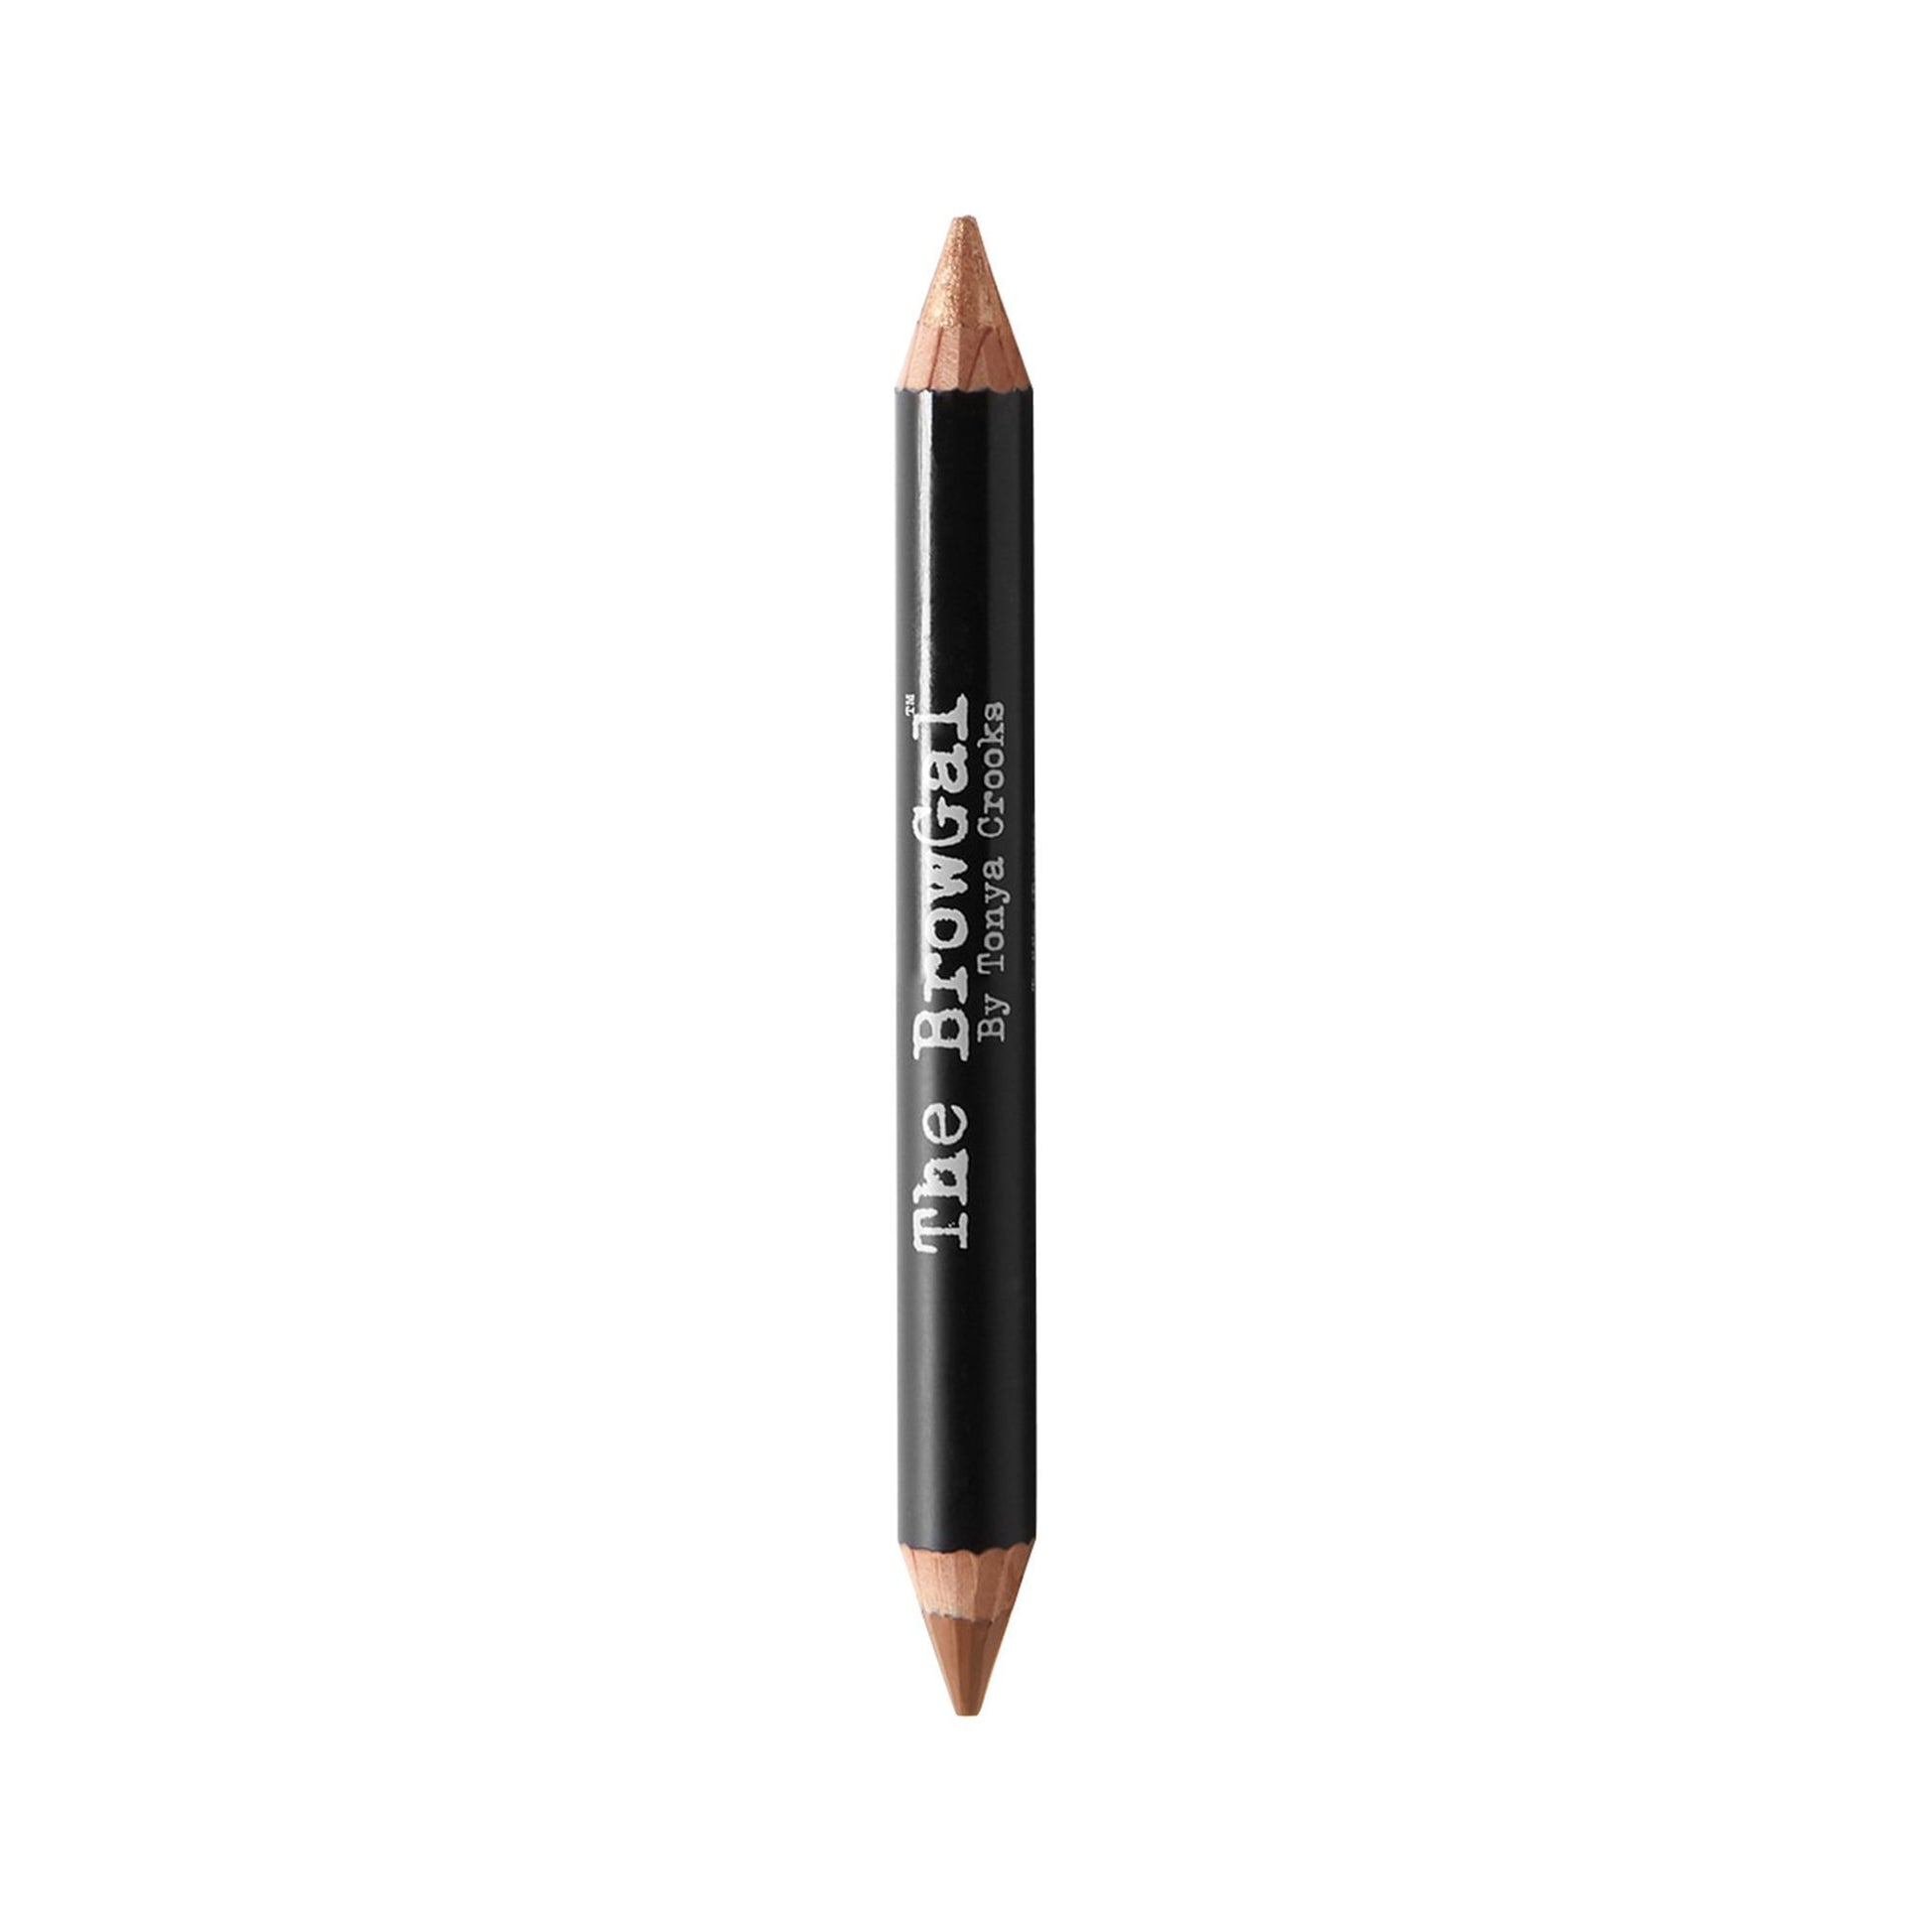 Makeup, Skin & Personal Care The BrowGal Highlighter & Concealer Duo Pencil, Bronze/Toffee